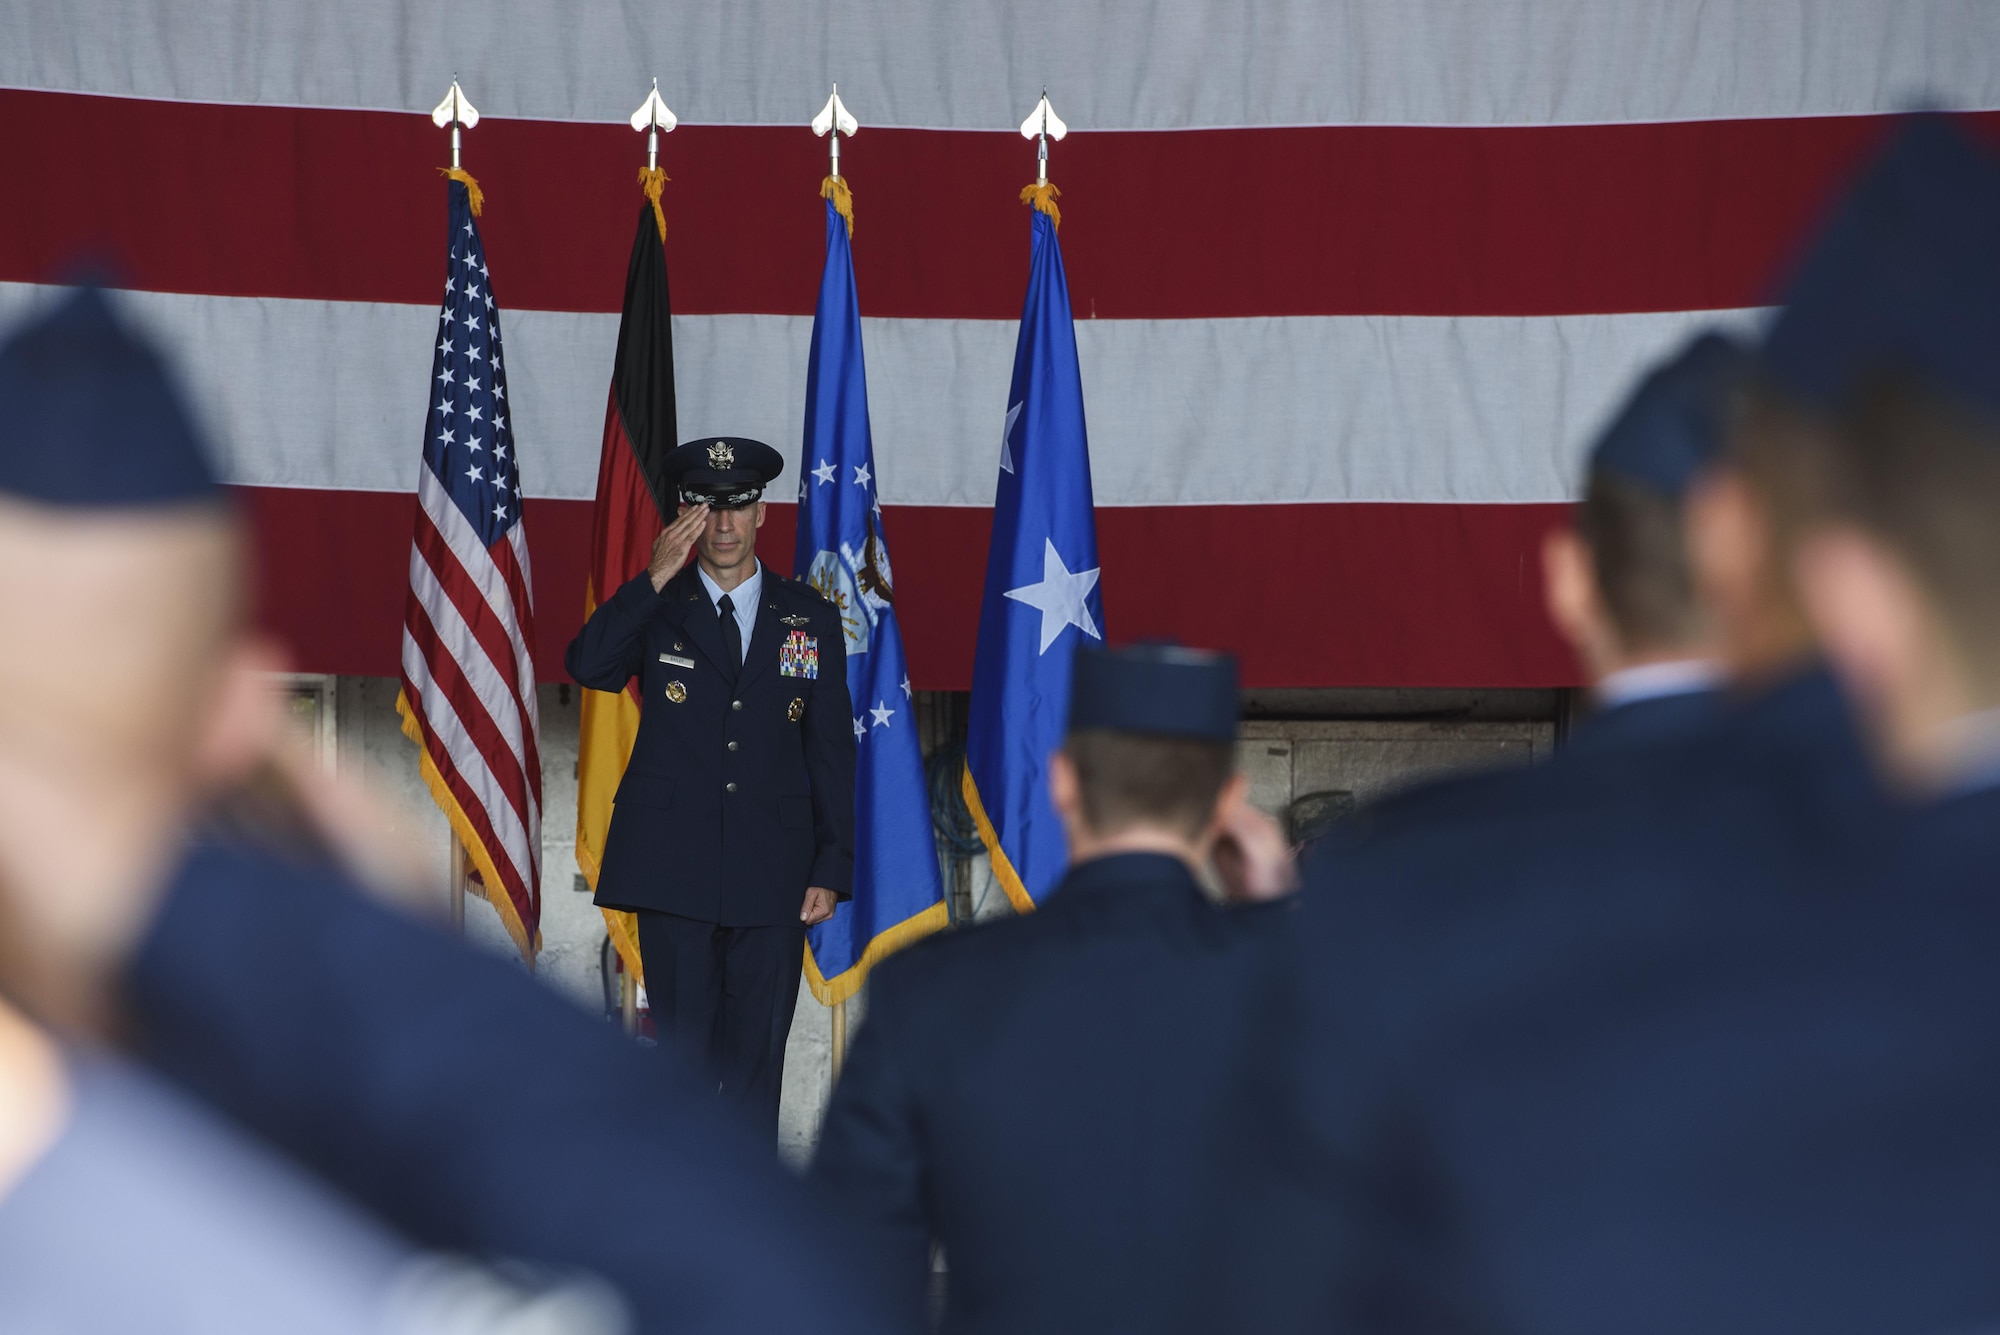 Col. Jason Bailey, 52nd Fighter Wing commander, renders his first salute as the 52nd FW commander during the change of command ceremony at Spangdahlem Air Base, Germany, Aug. 29, 2017. Bailey came from Bagram Air Field, Afghanistan, as the commander of the 455th Expeditionary Operations Group. (U.S. Air Force photo by Staff Sgt. Jonathan Snyder)